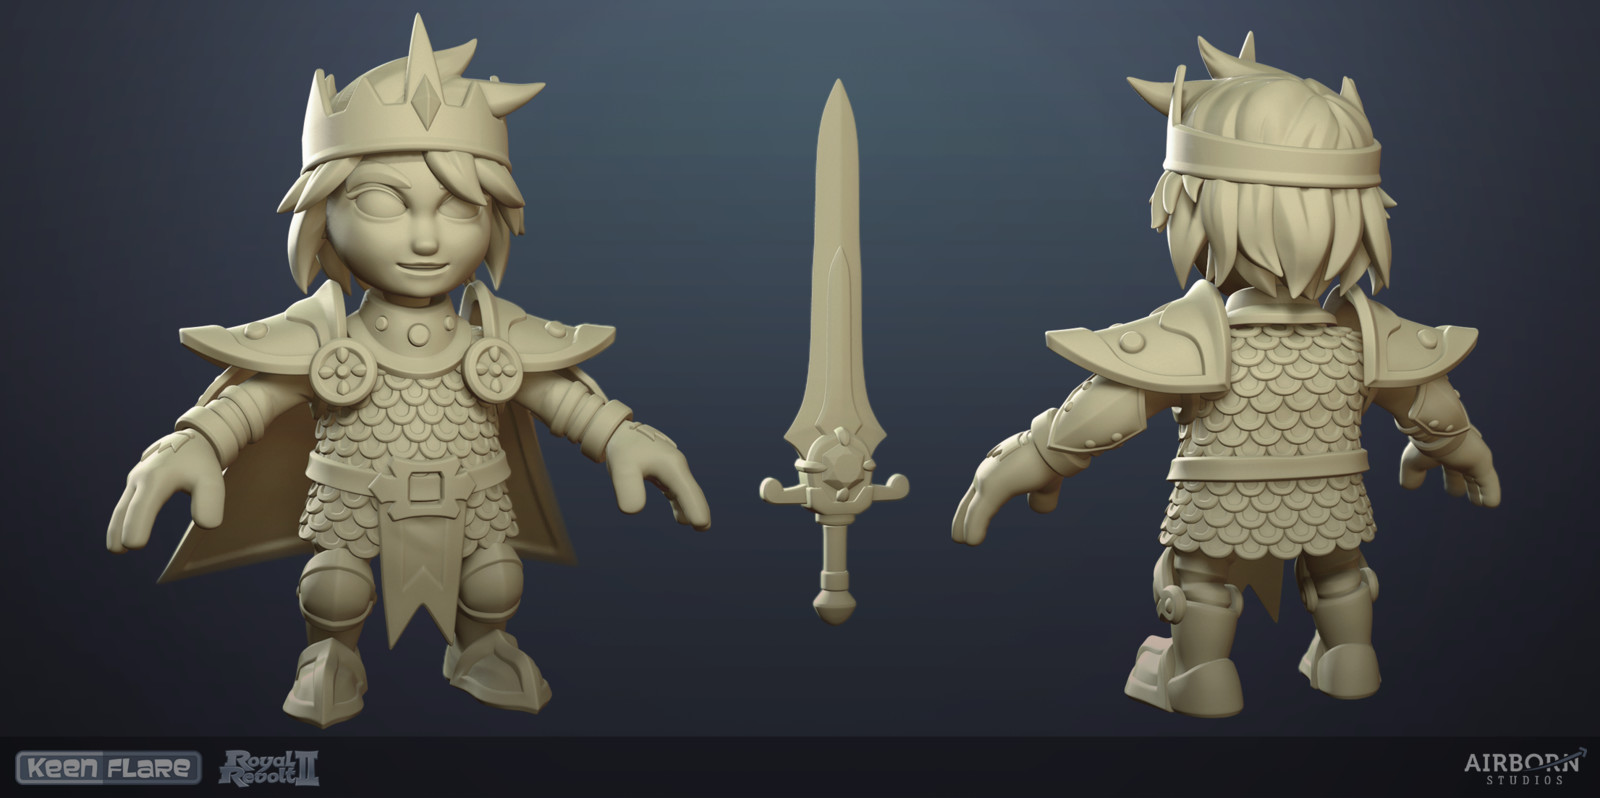 Royal Revolt 2: Hero high-poly model by Tim Moreels


We had done the original main protagonist of the game years ago and now got tasked with updating and improving the model.